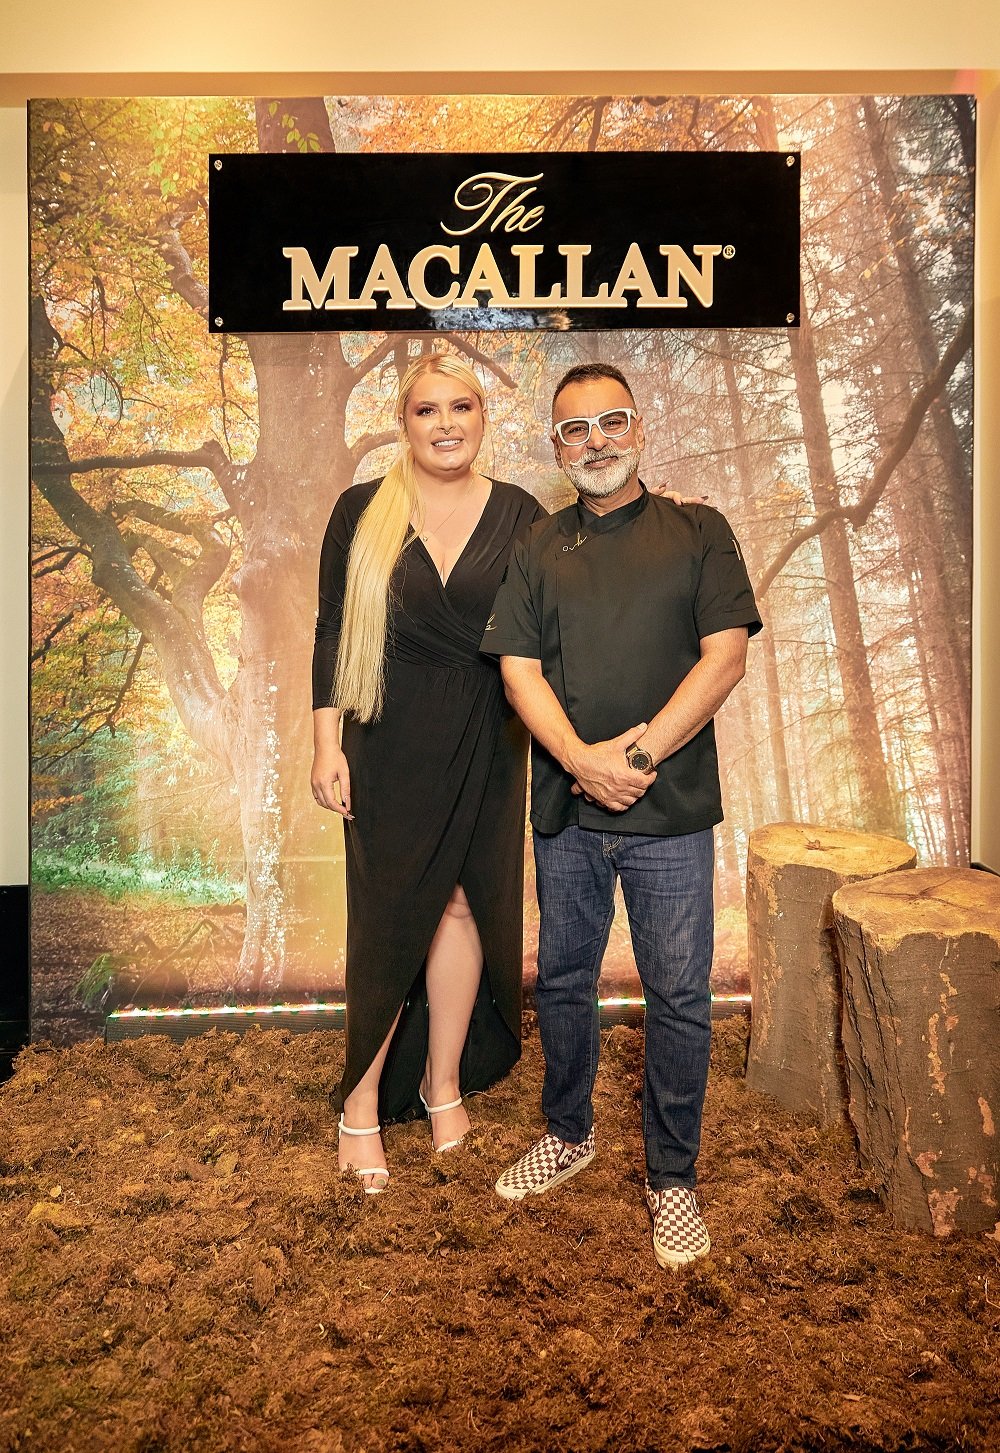 The Macallan Collaborates with Michelin Star Chef Vineet Bhatia to curate a 12-course bespoke culinary pairing experience